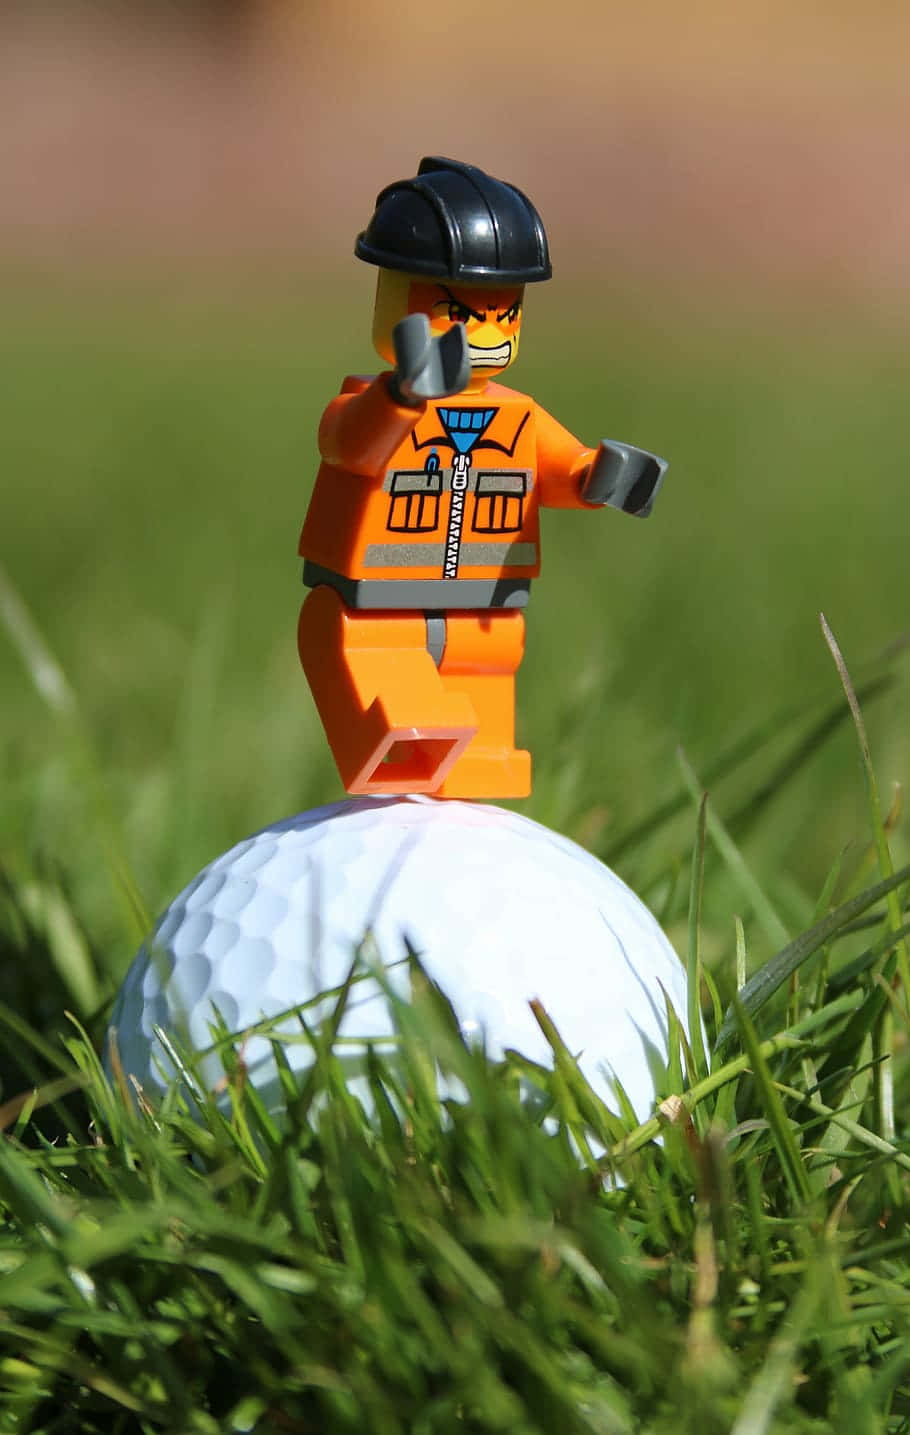 Funny Traffic Enforcer Toy On Golf Ball Picture